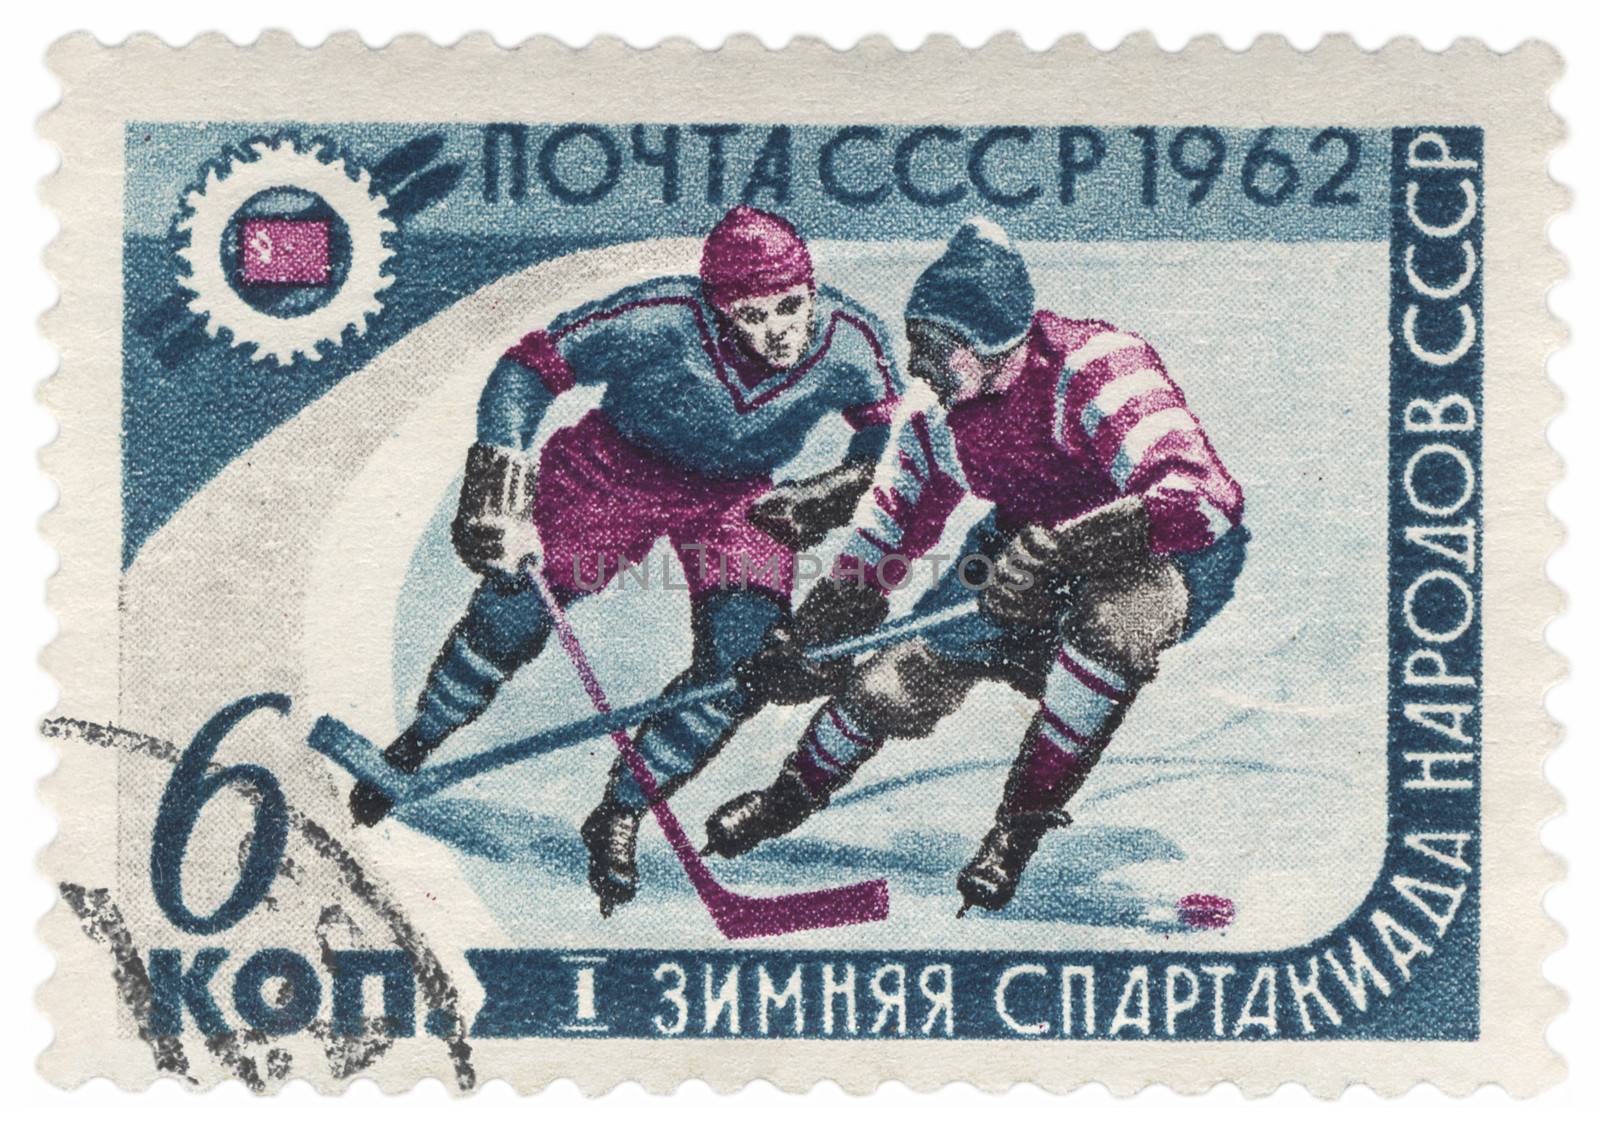 USSR - CIRCA 1962: A post stamp printed in USSR shows ice hockey, devoted to the 1st Winter Olympics of the USSR, circa 1962